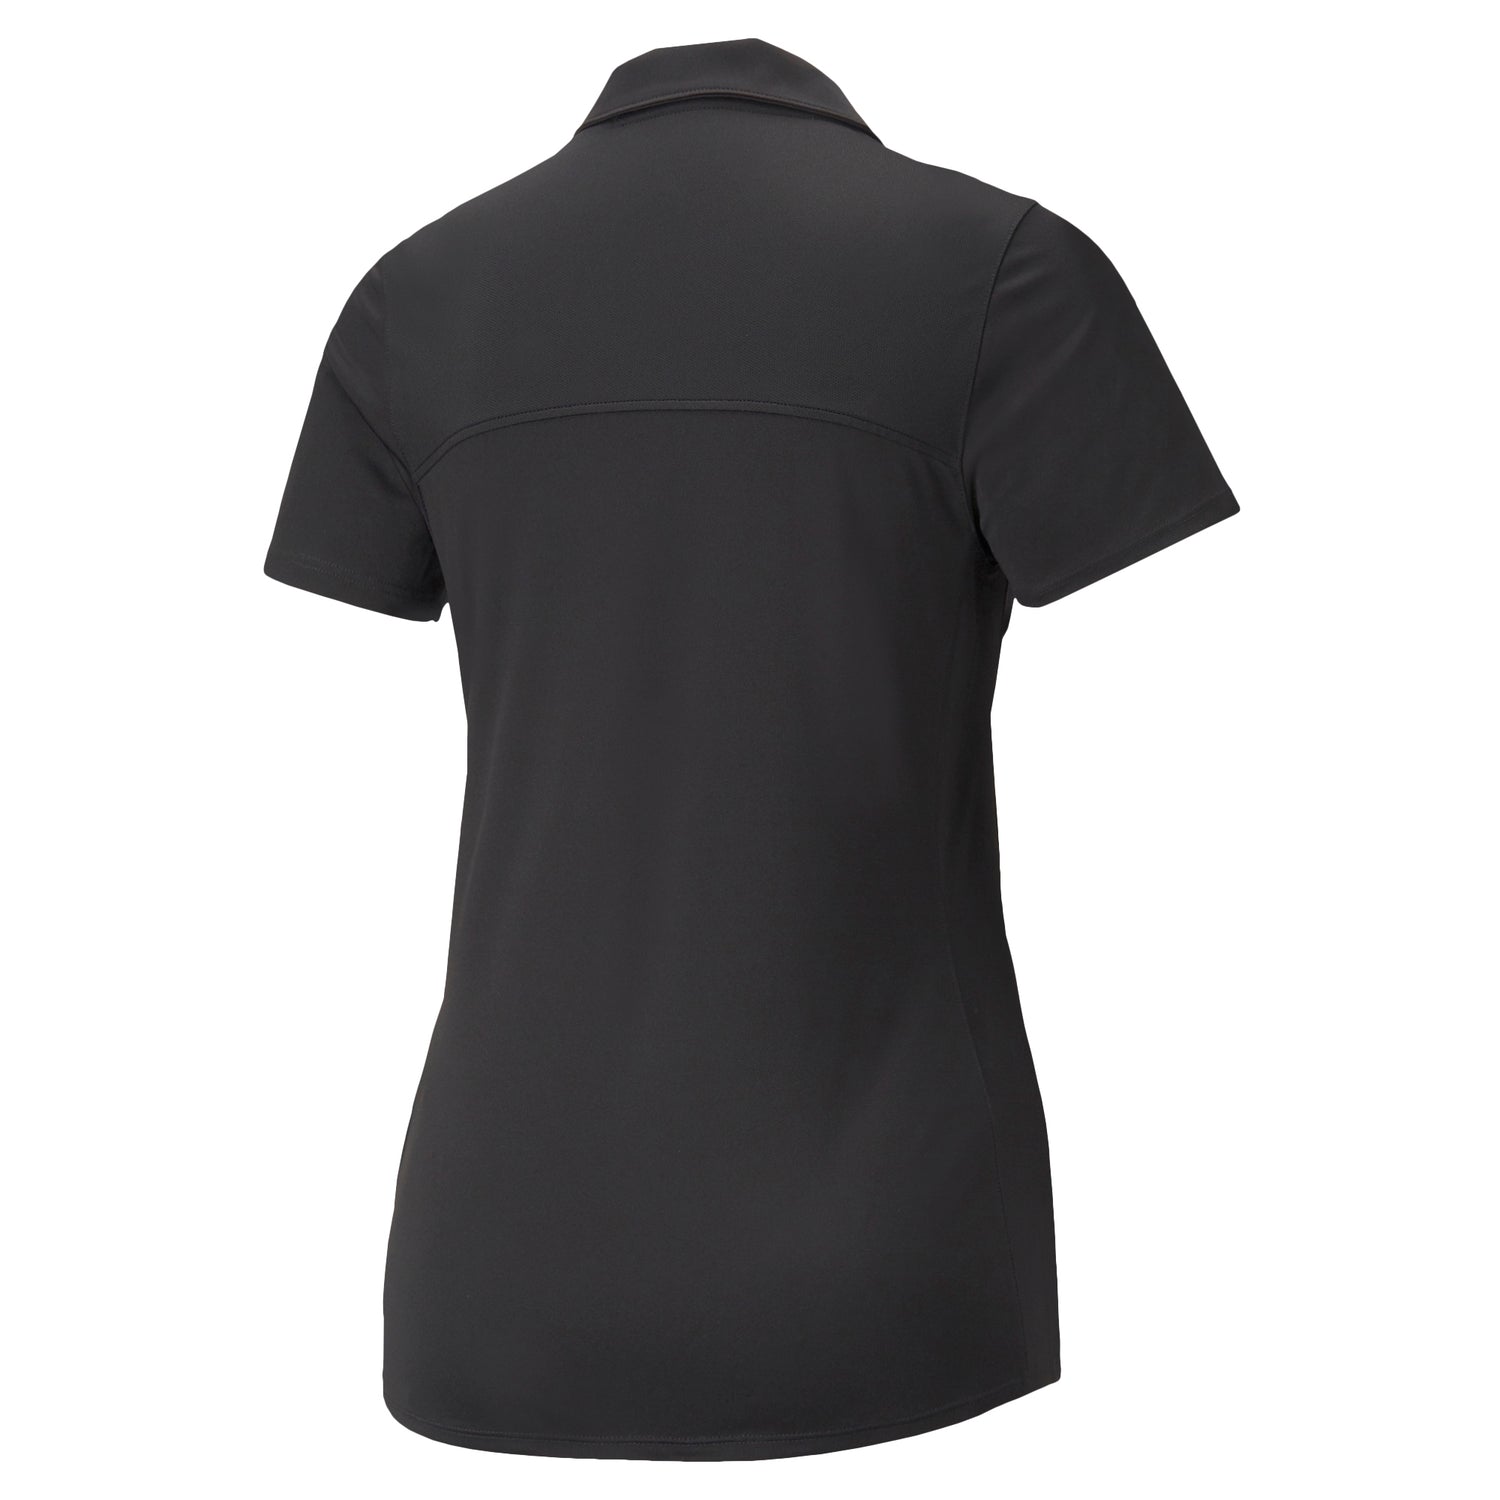  Short-Sleeve Workwear for Unisex Summer Casual Lapel Polo  Business Golf T-Shirt Women Men Sport Jersey (Color : Black, Size : 5X-Large)  : Clothing, Shoes & Jewelry